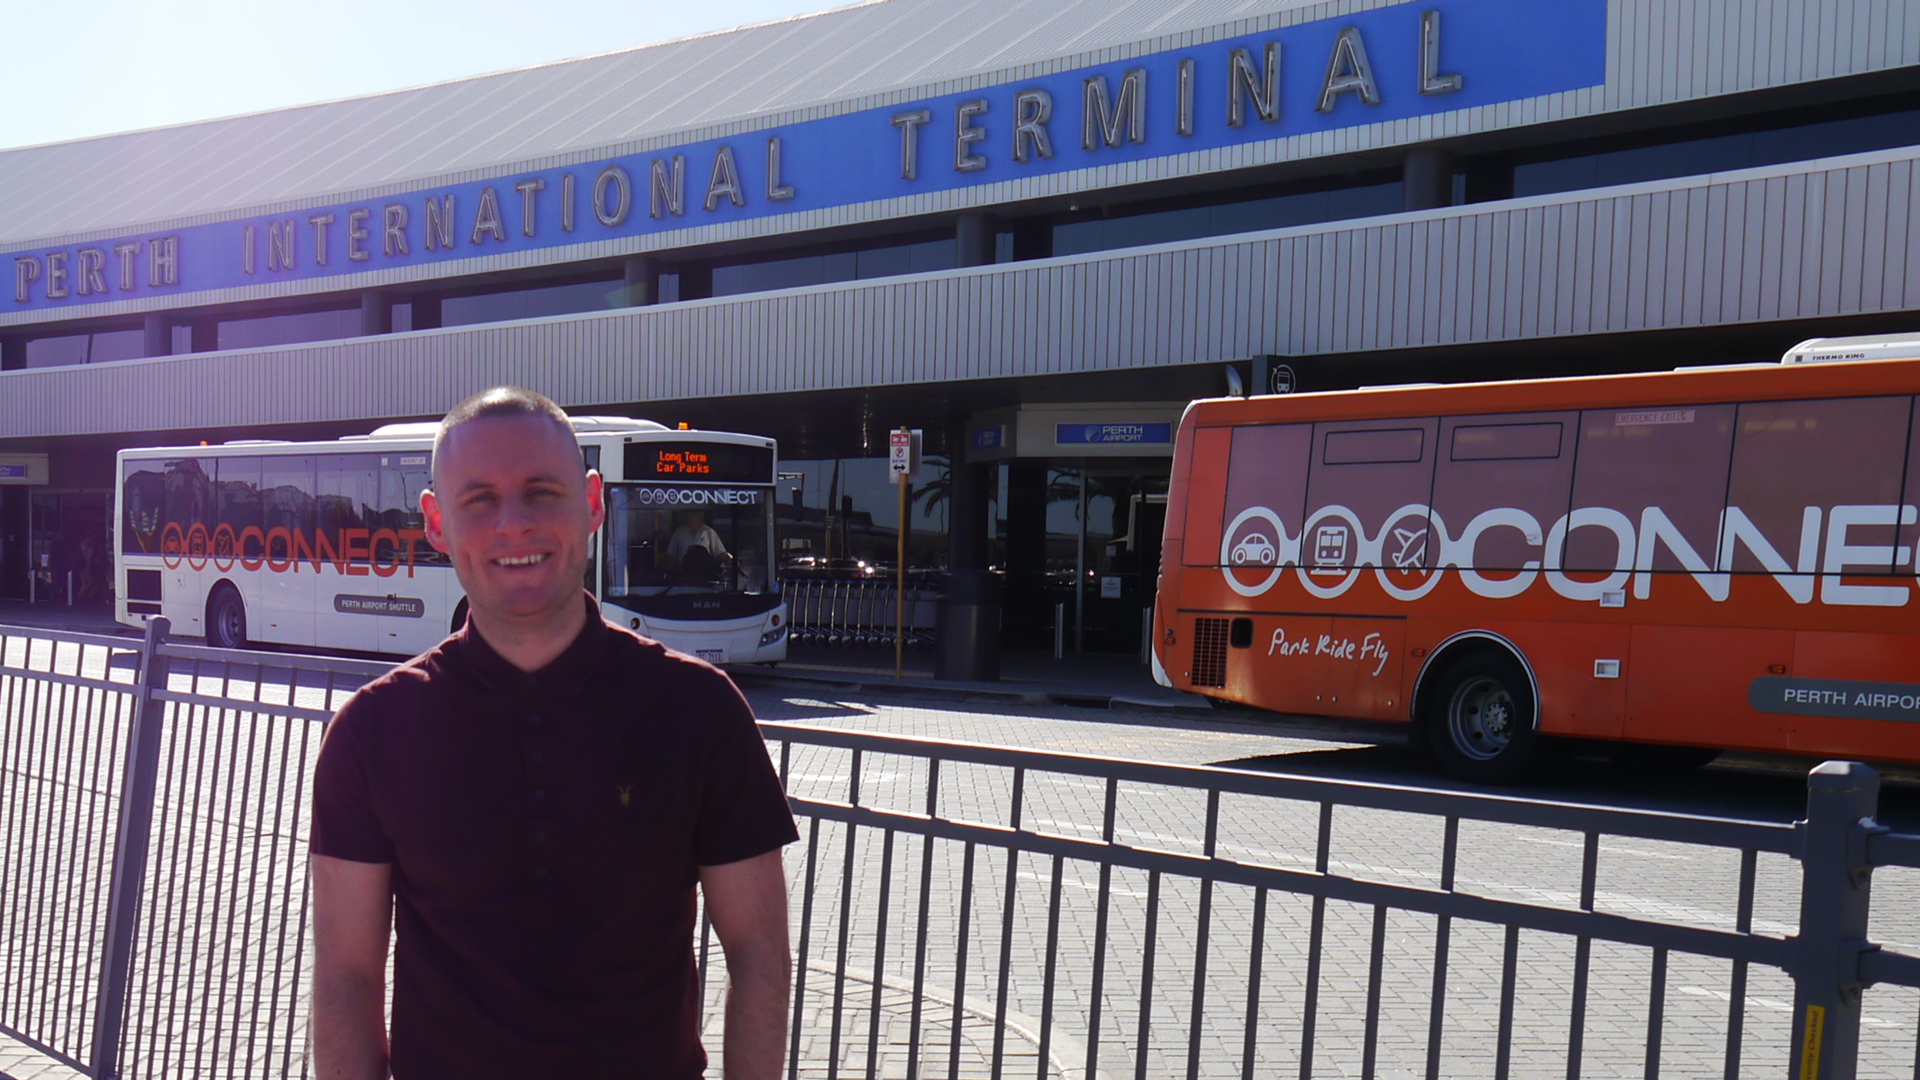 Perth airport - I managed a smile but was still upset about my stamp!